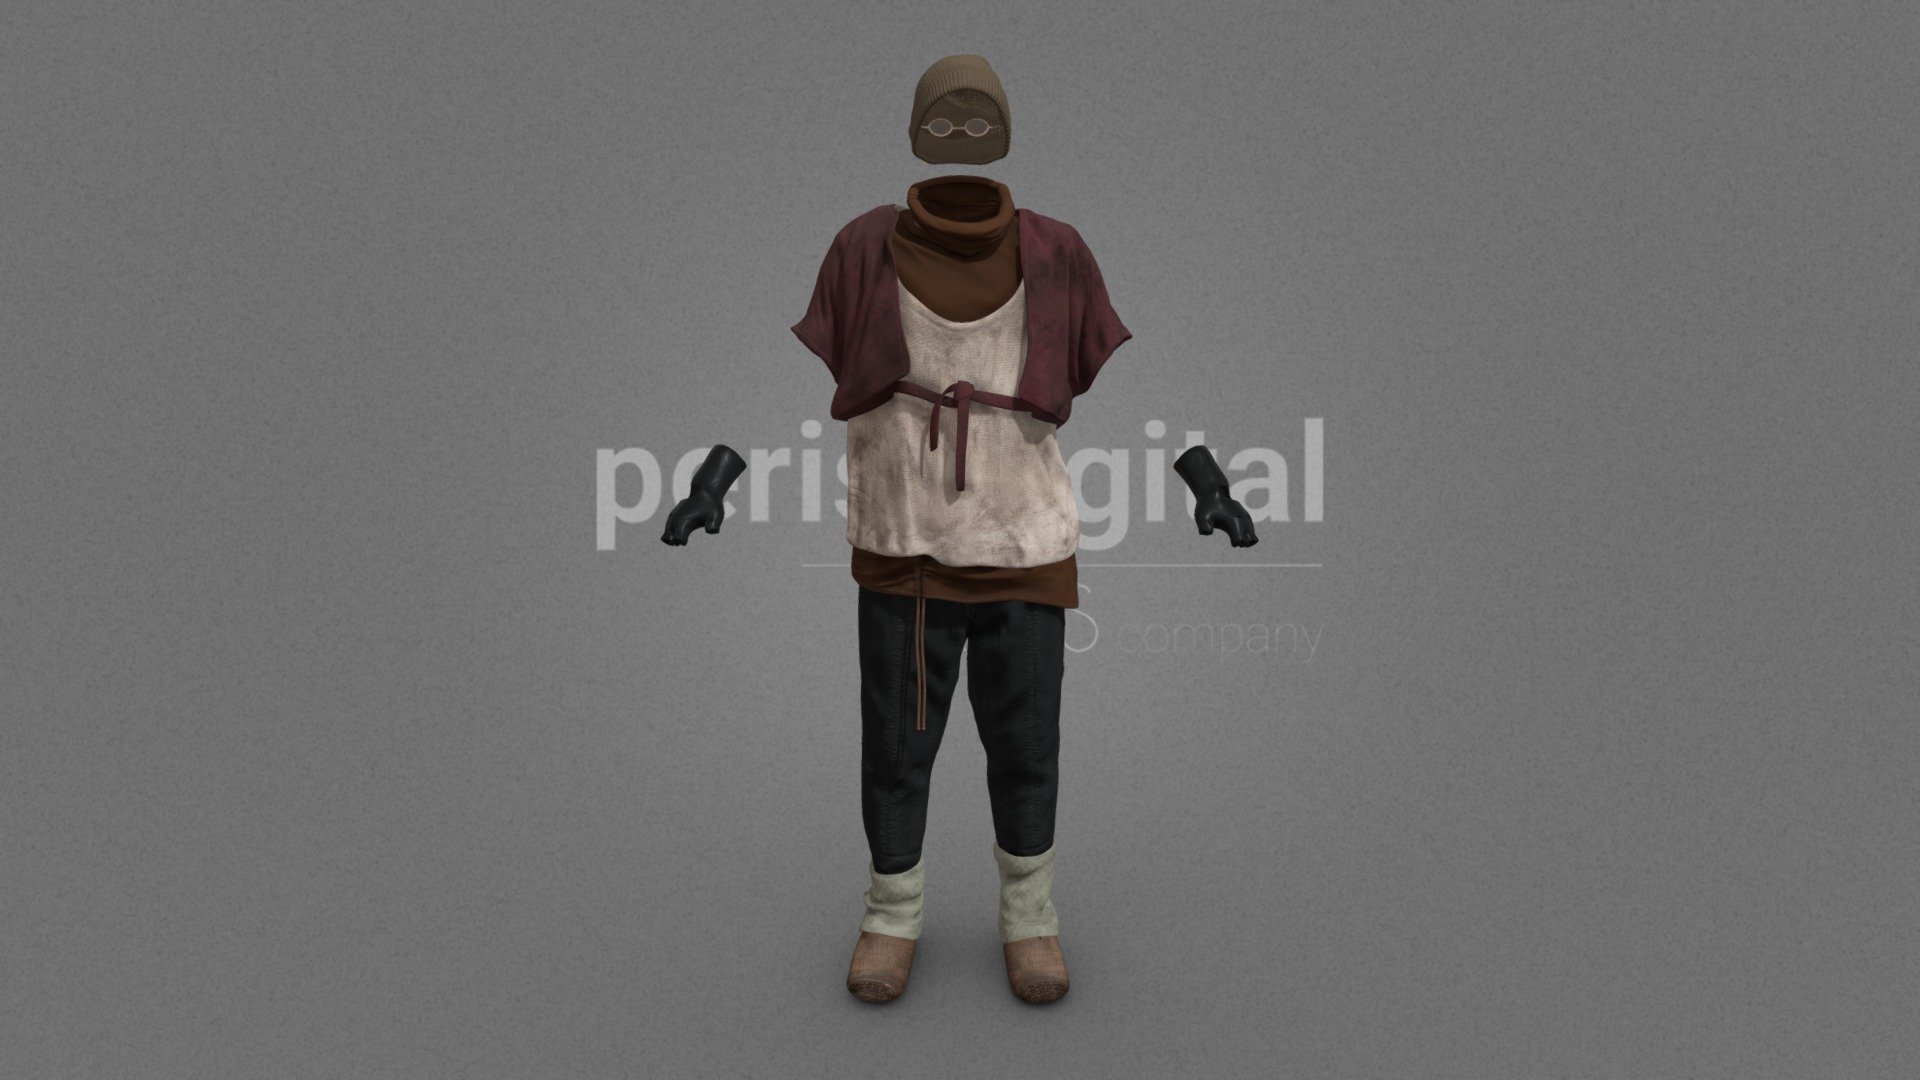 Maroon knitted short sleeve lace-up top, brown drawstring vest with high collar, white tank top, grey leg opening drawcord trousers, knitted leg warmers, wicker clogs, black leather gloves, vintage sunglasses, brown wool cap.




They are optimized for use in 3D scenes of high polygonalization and optimized for rendering.

We do not include characters, but they are positioned for you to include and adjust your own character.

They have a model LOW (_LODRIG) inside the Blender file (included in the AdditionalFiles), which you can use for vertex weighting or cloth simulation and thus, make the transfer of vertices or property masks from the LOW to the HIGH** model.

We have included the texture maps in high resolution, as well as the Displacement maps, so you can make extreme point of view with your 3D cameras, as well as the Blender file so you can edit any aspect of the set. 

Enjoy it.

Web: https://peris.digital/ - Wasteland Series - Model 11 - Buy Royalty Free 3D model by Peris Digital (@perisdigital) 3d model